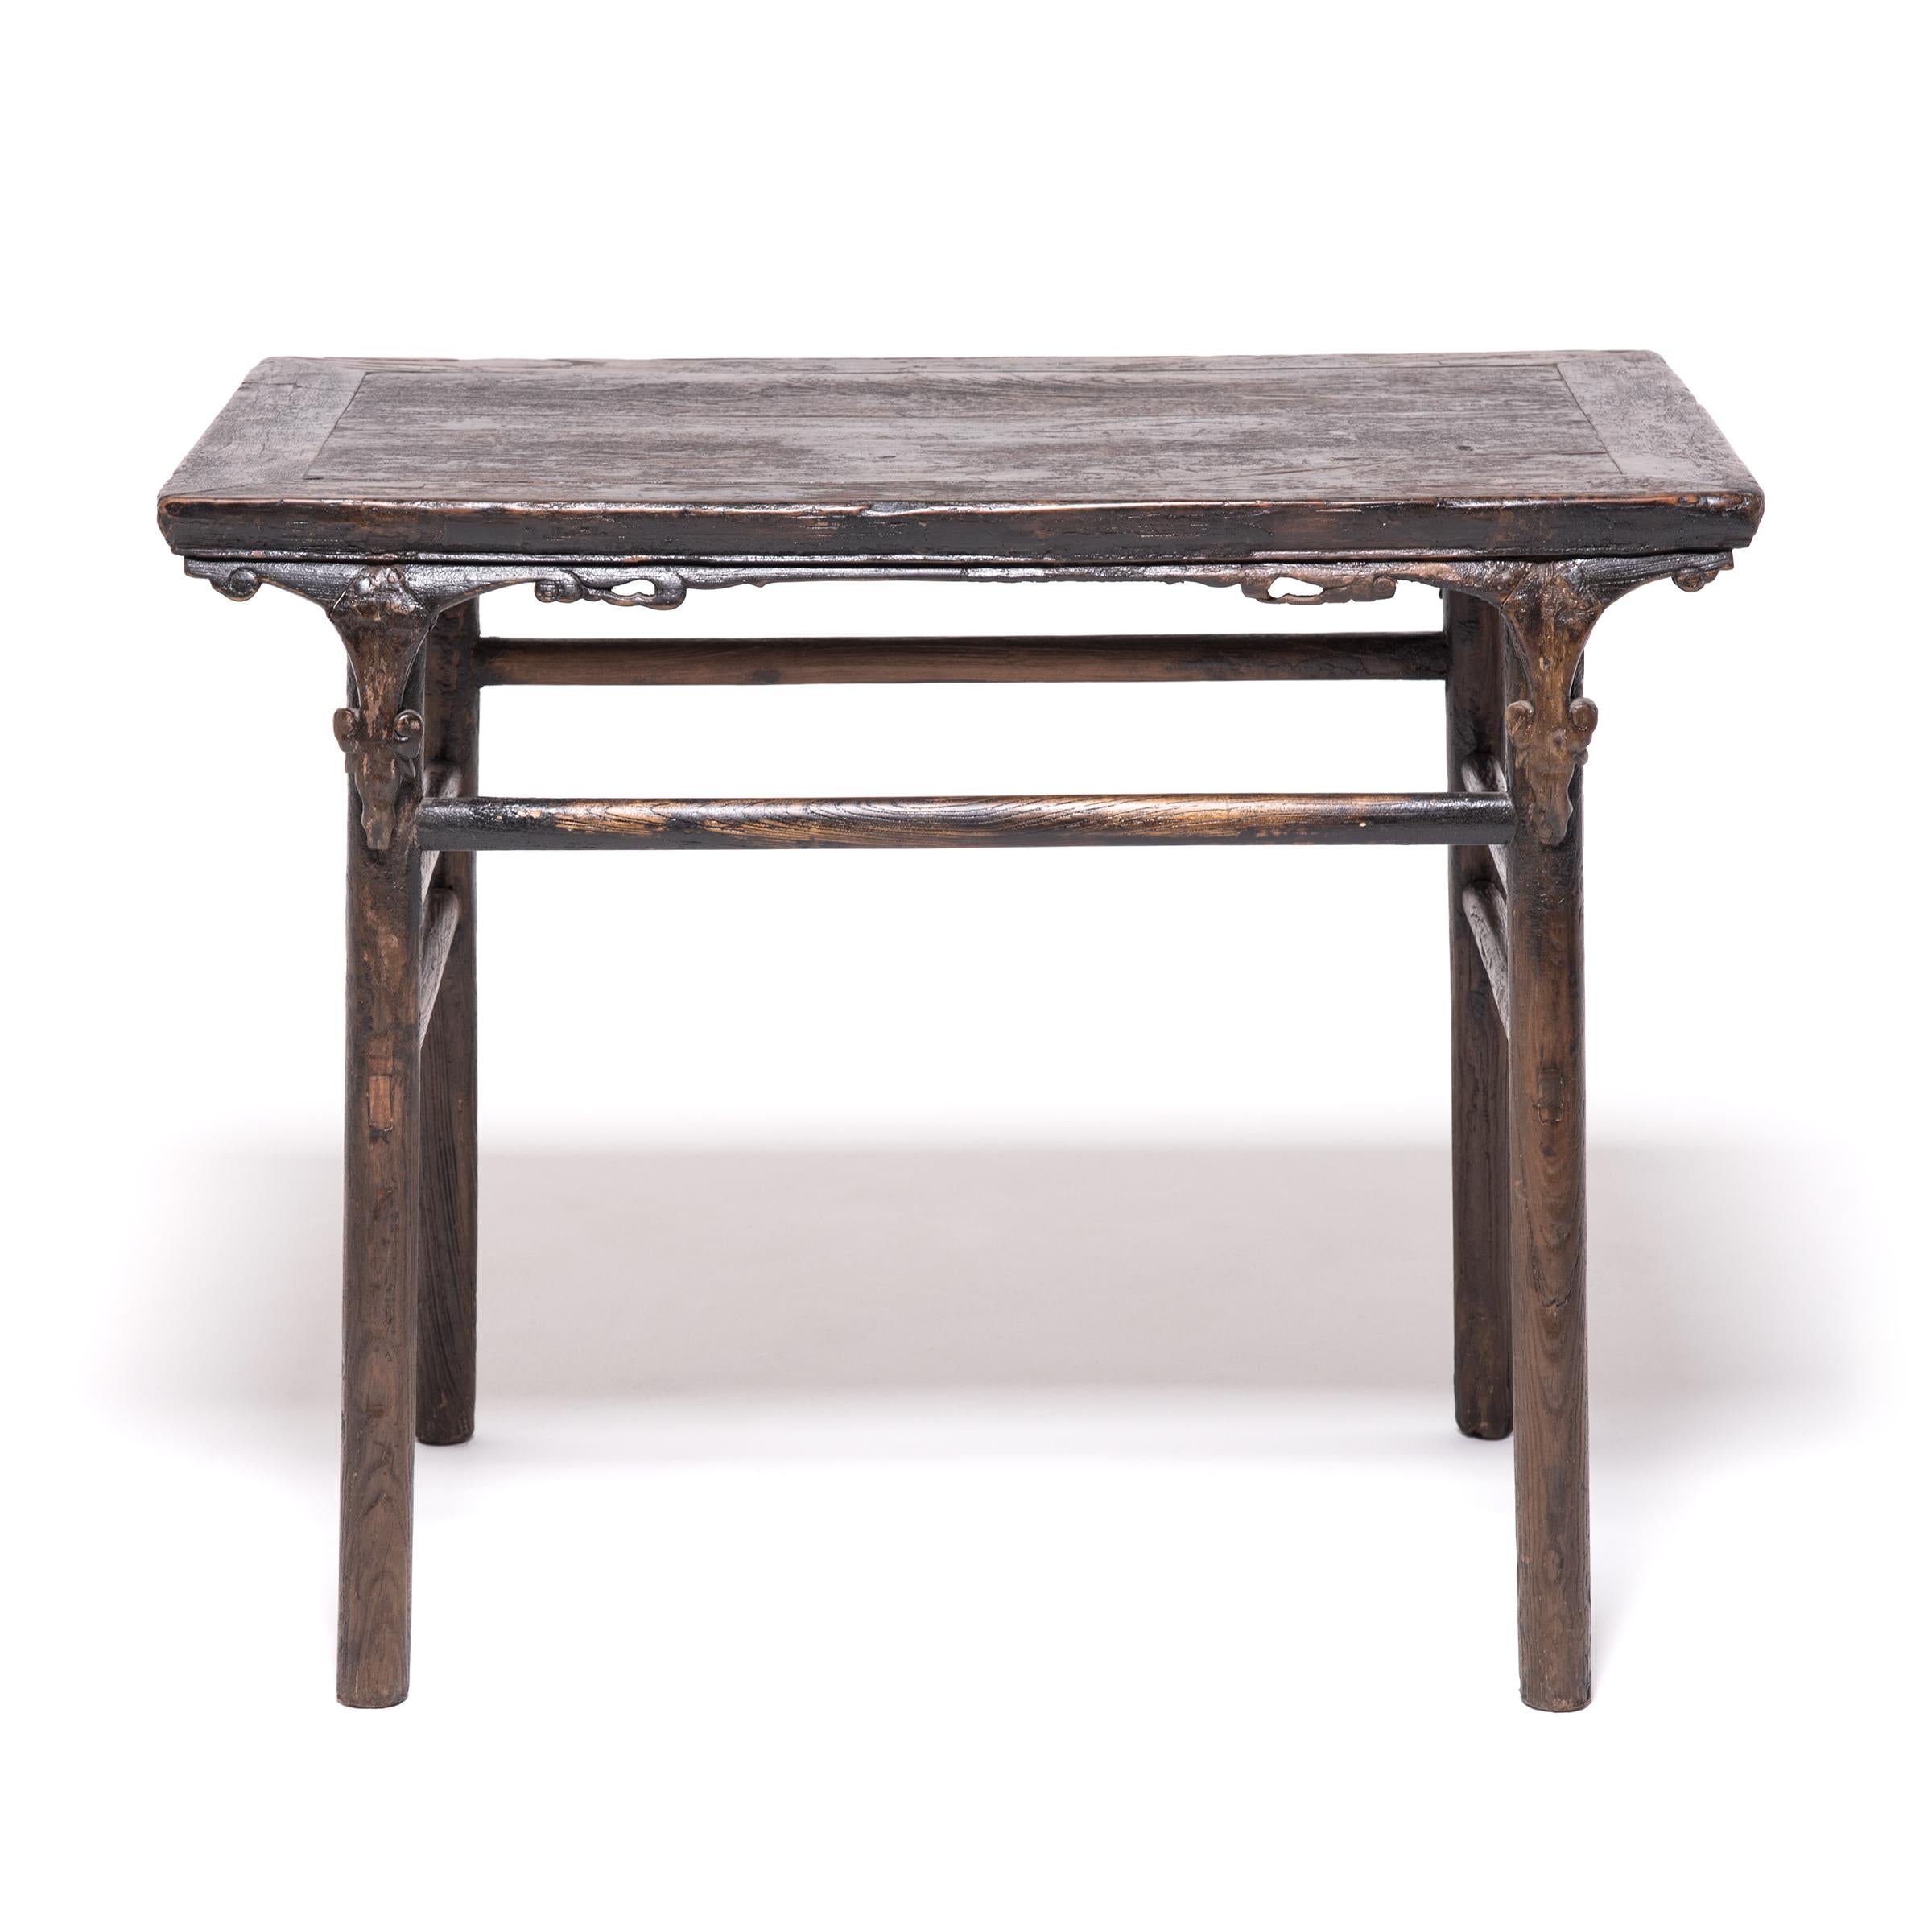 Chinese Ruyi Wine Table, c. 1800 In Good Condition For Sale In Chicago, IL